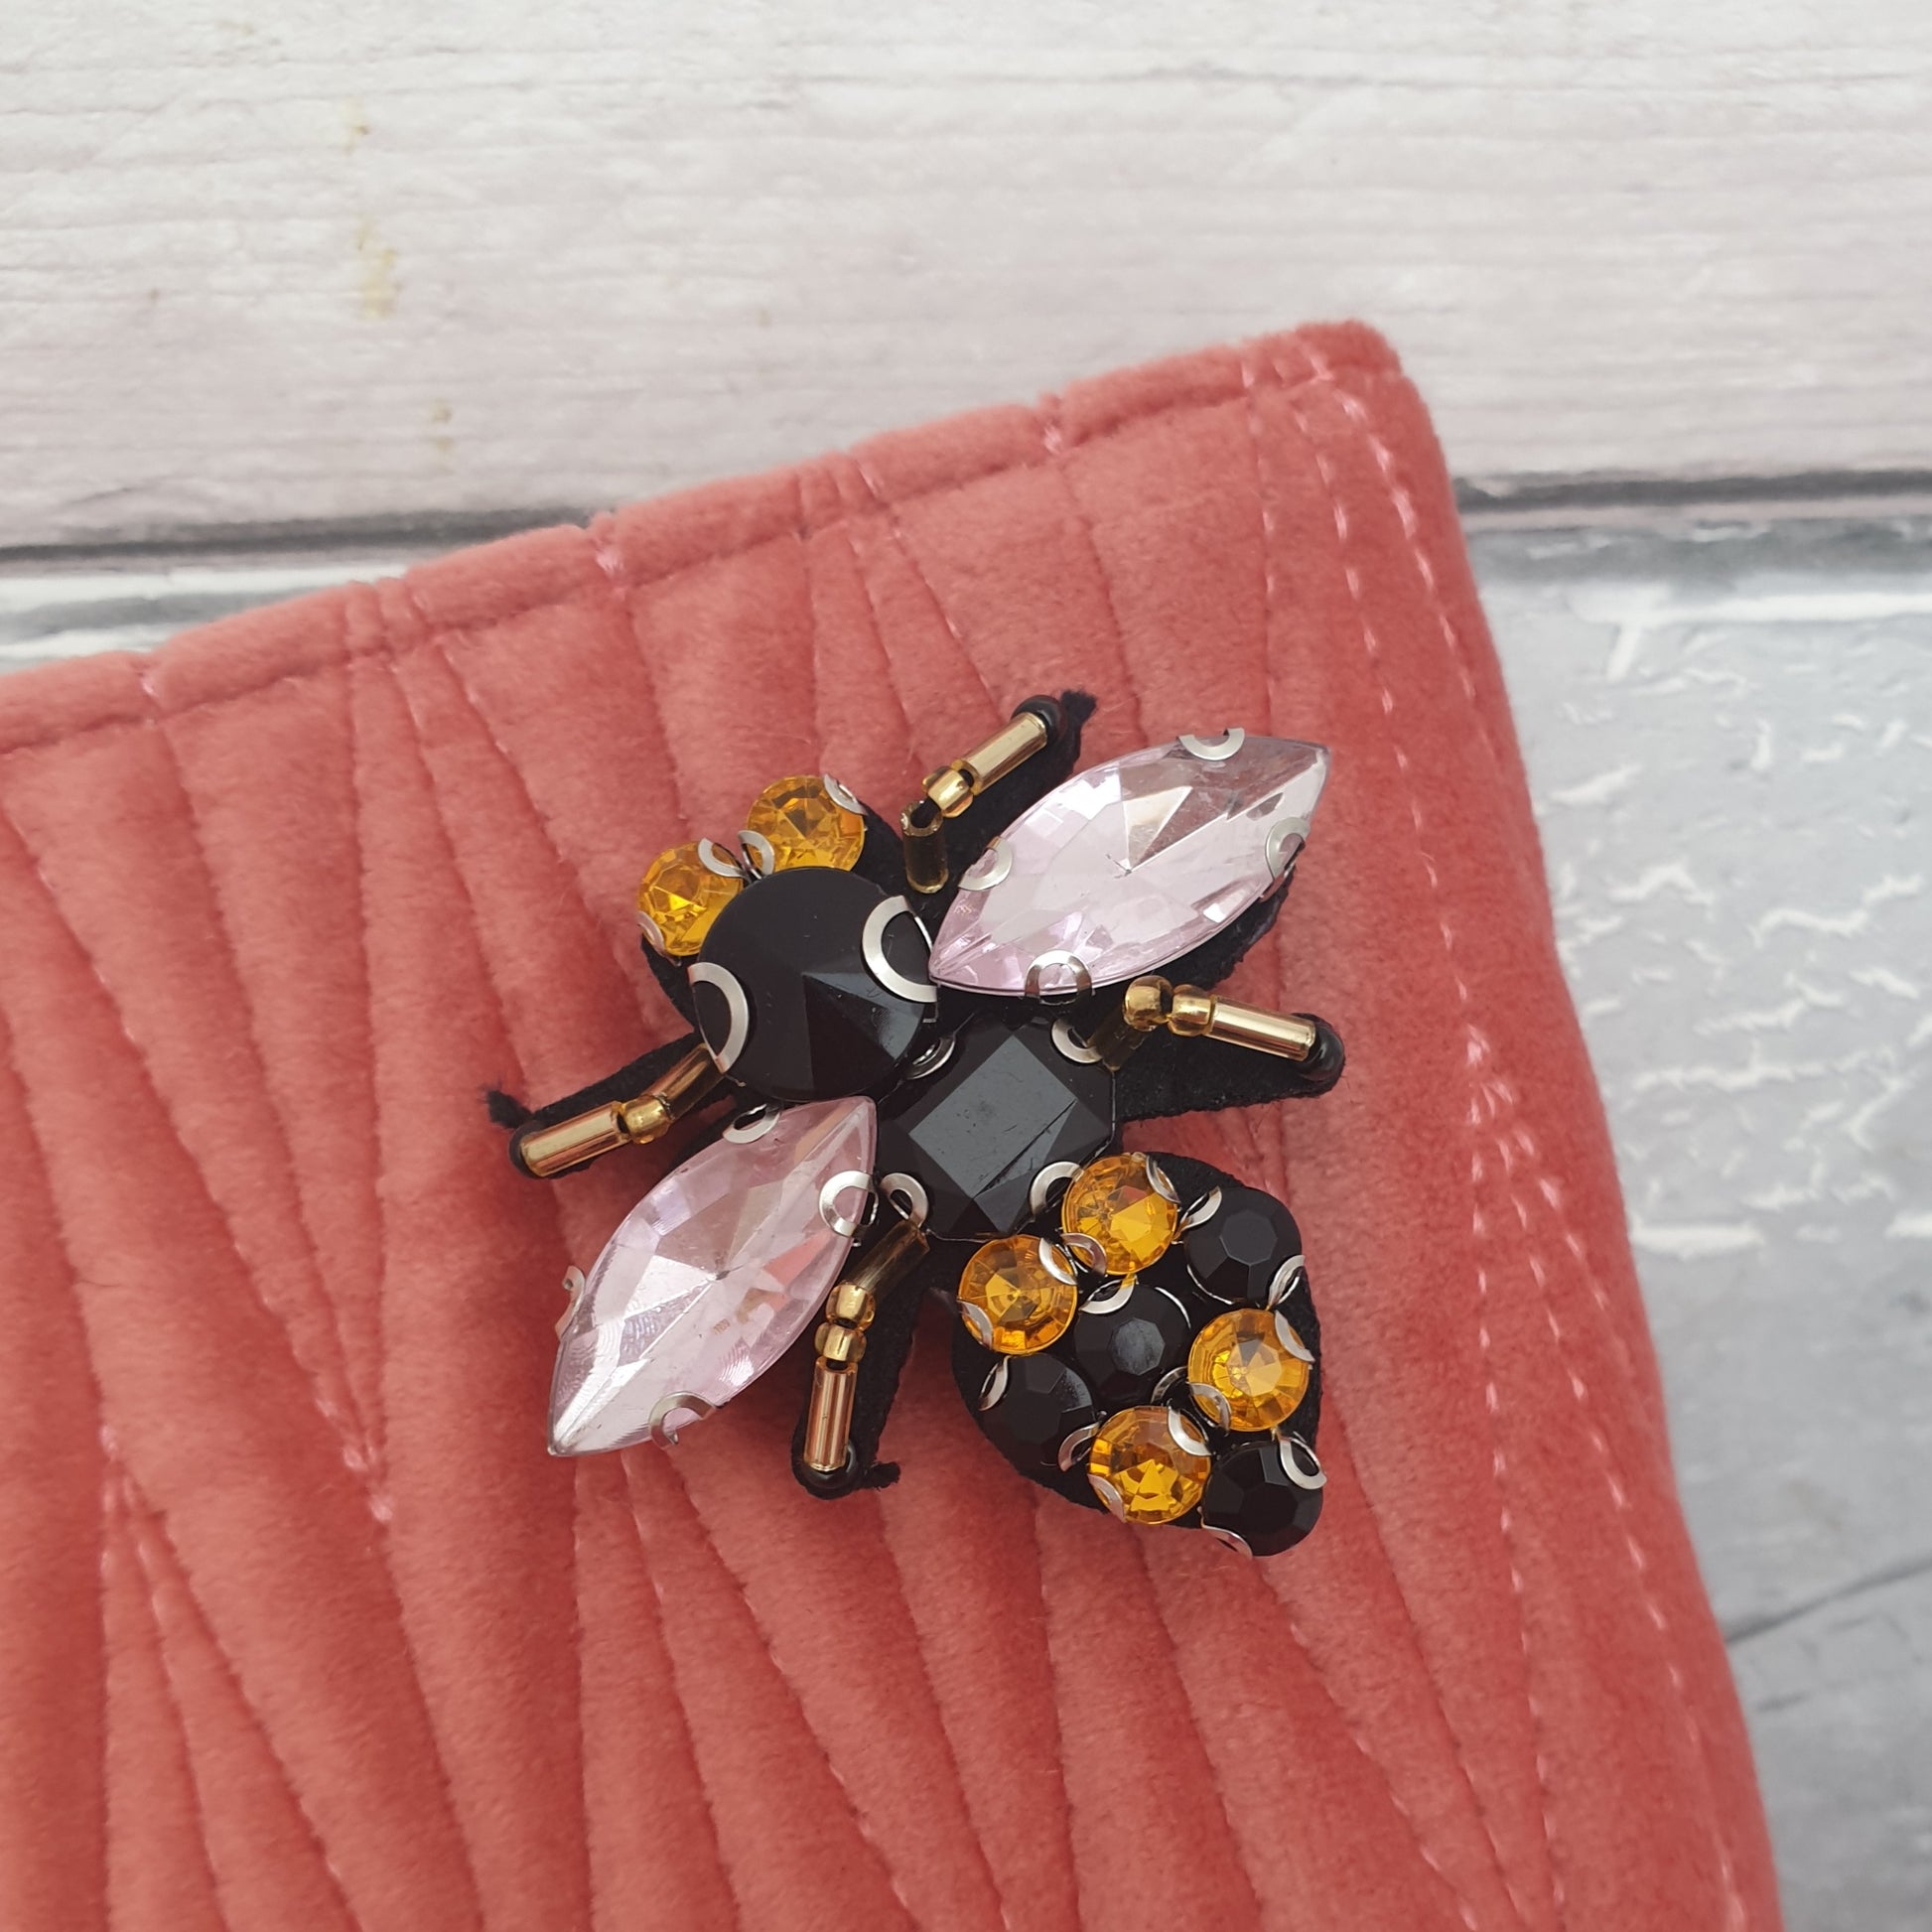 Velvet Quilted Make up bag with detachable Bee Brooch in Gold and Black.